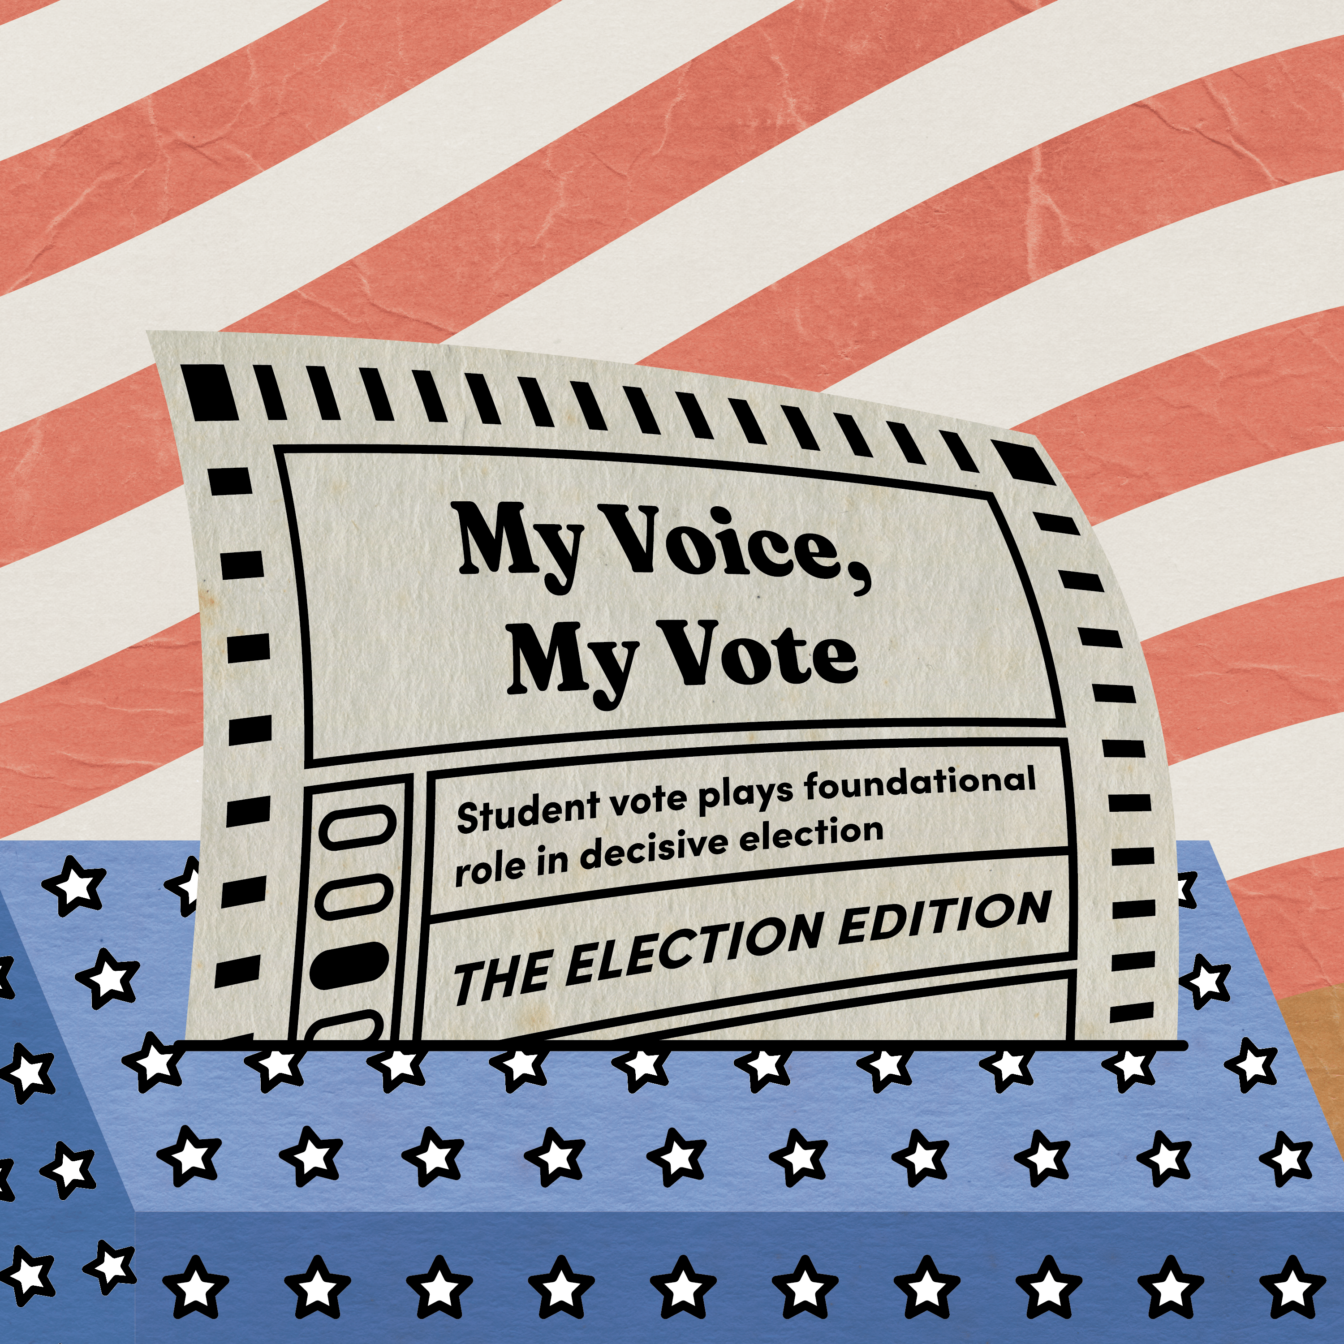 My Voice, My Vote: Student vote plays foundational role in decisive election